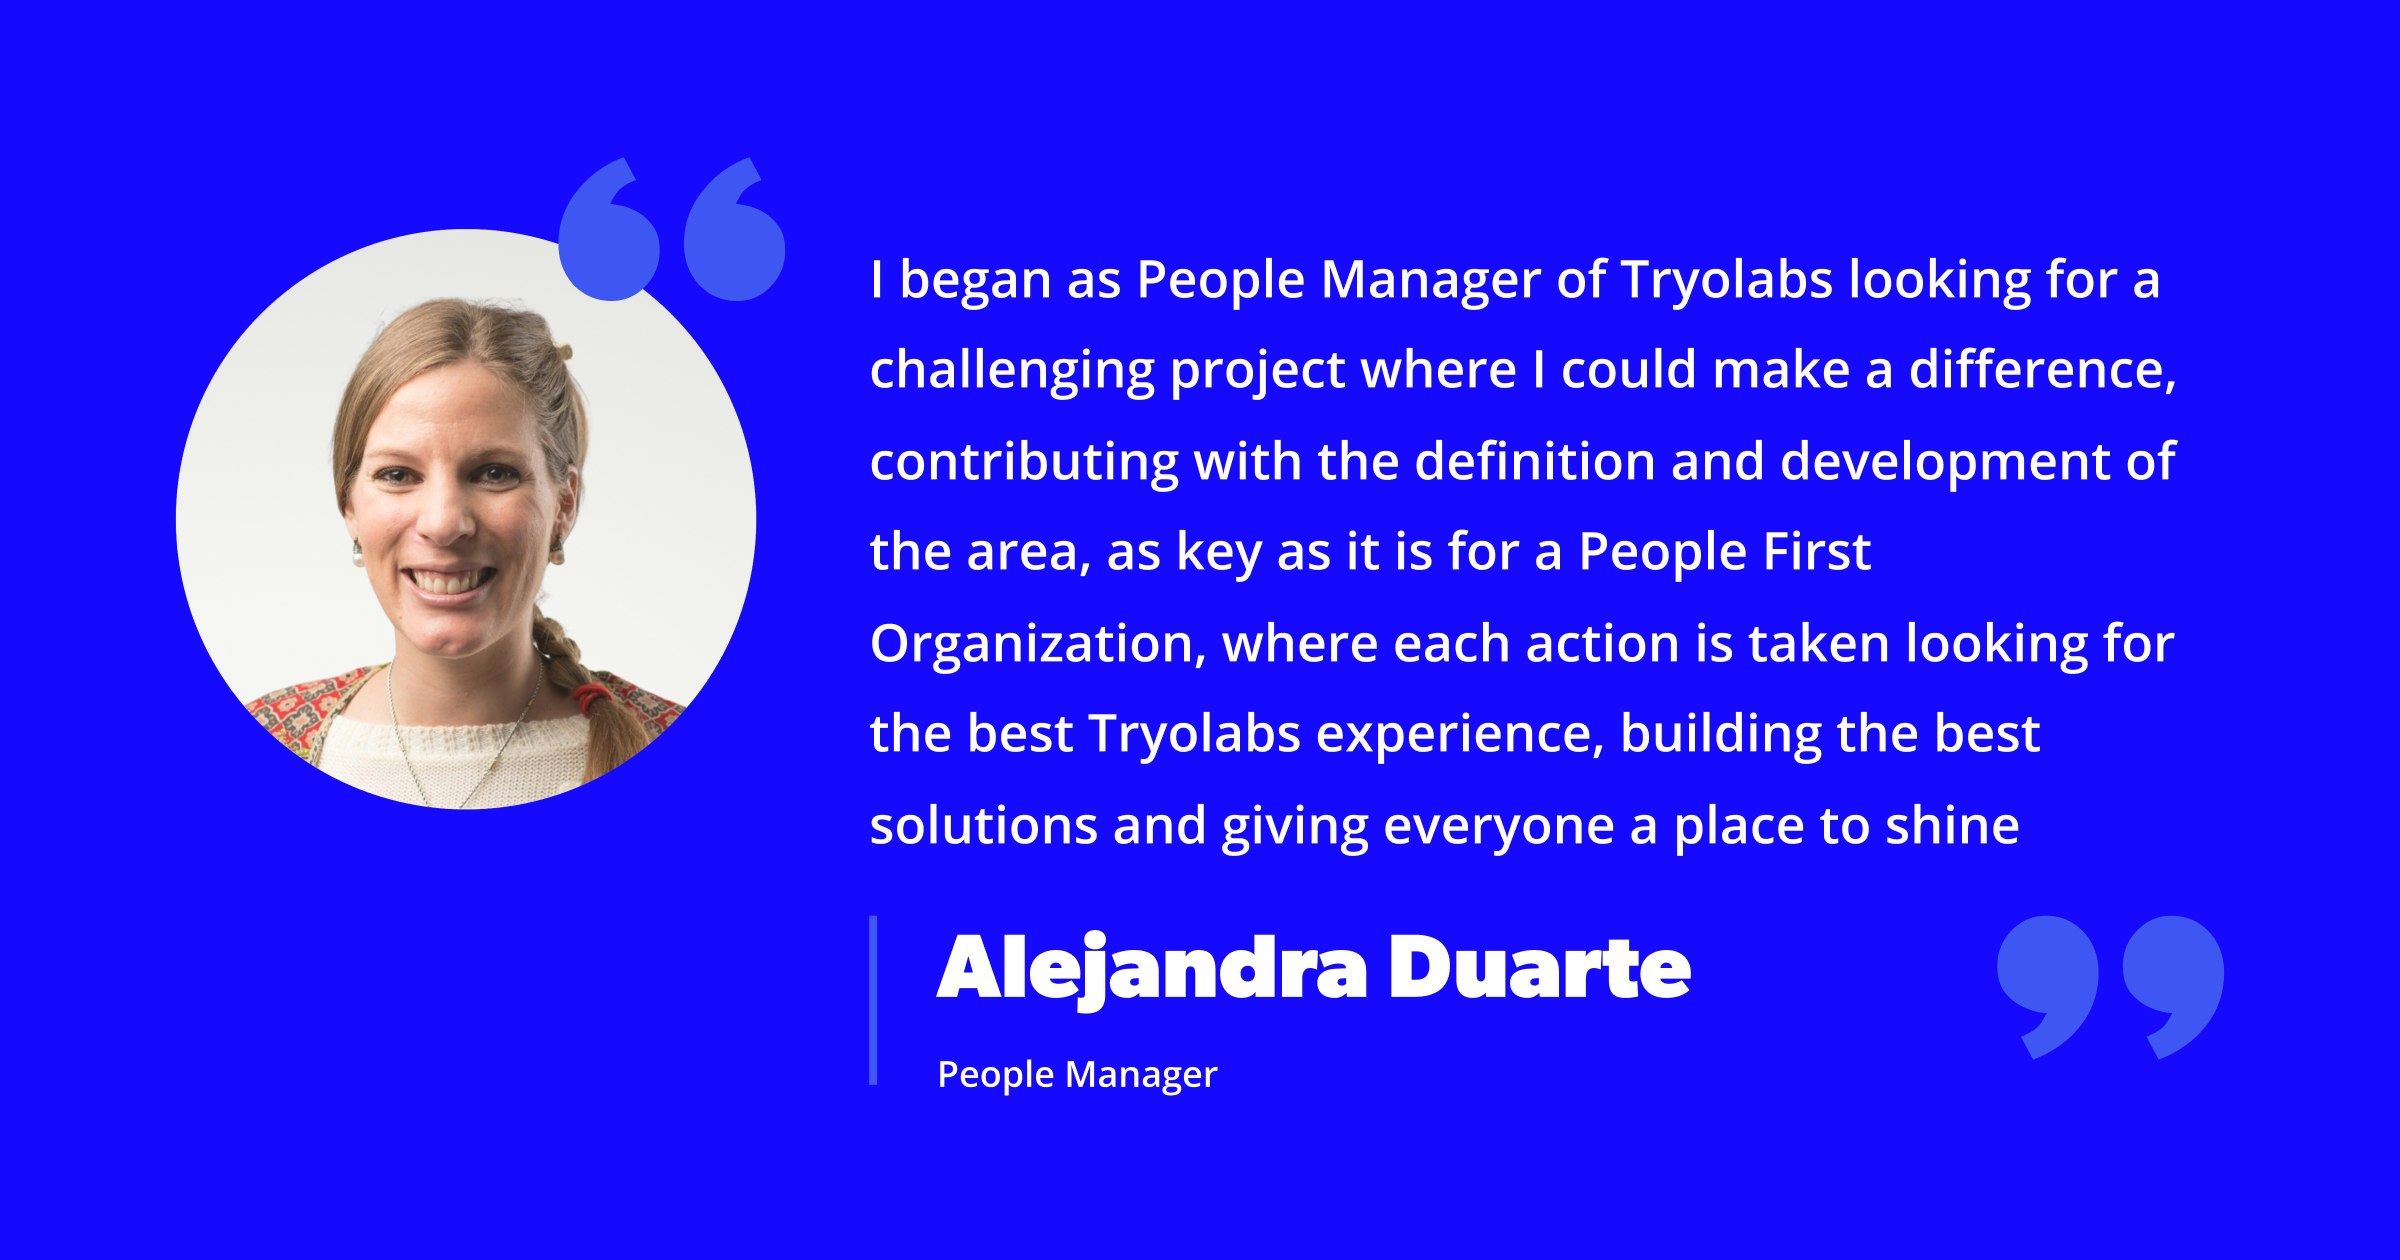 Image quote of Alejandra Duarte, People Manager.